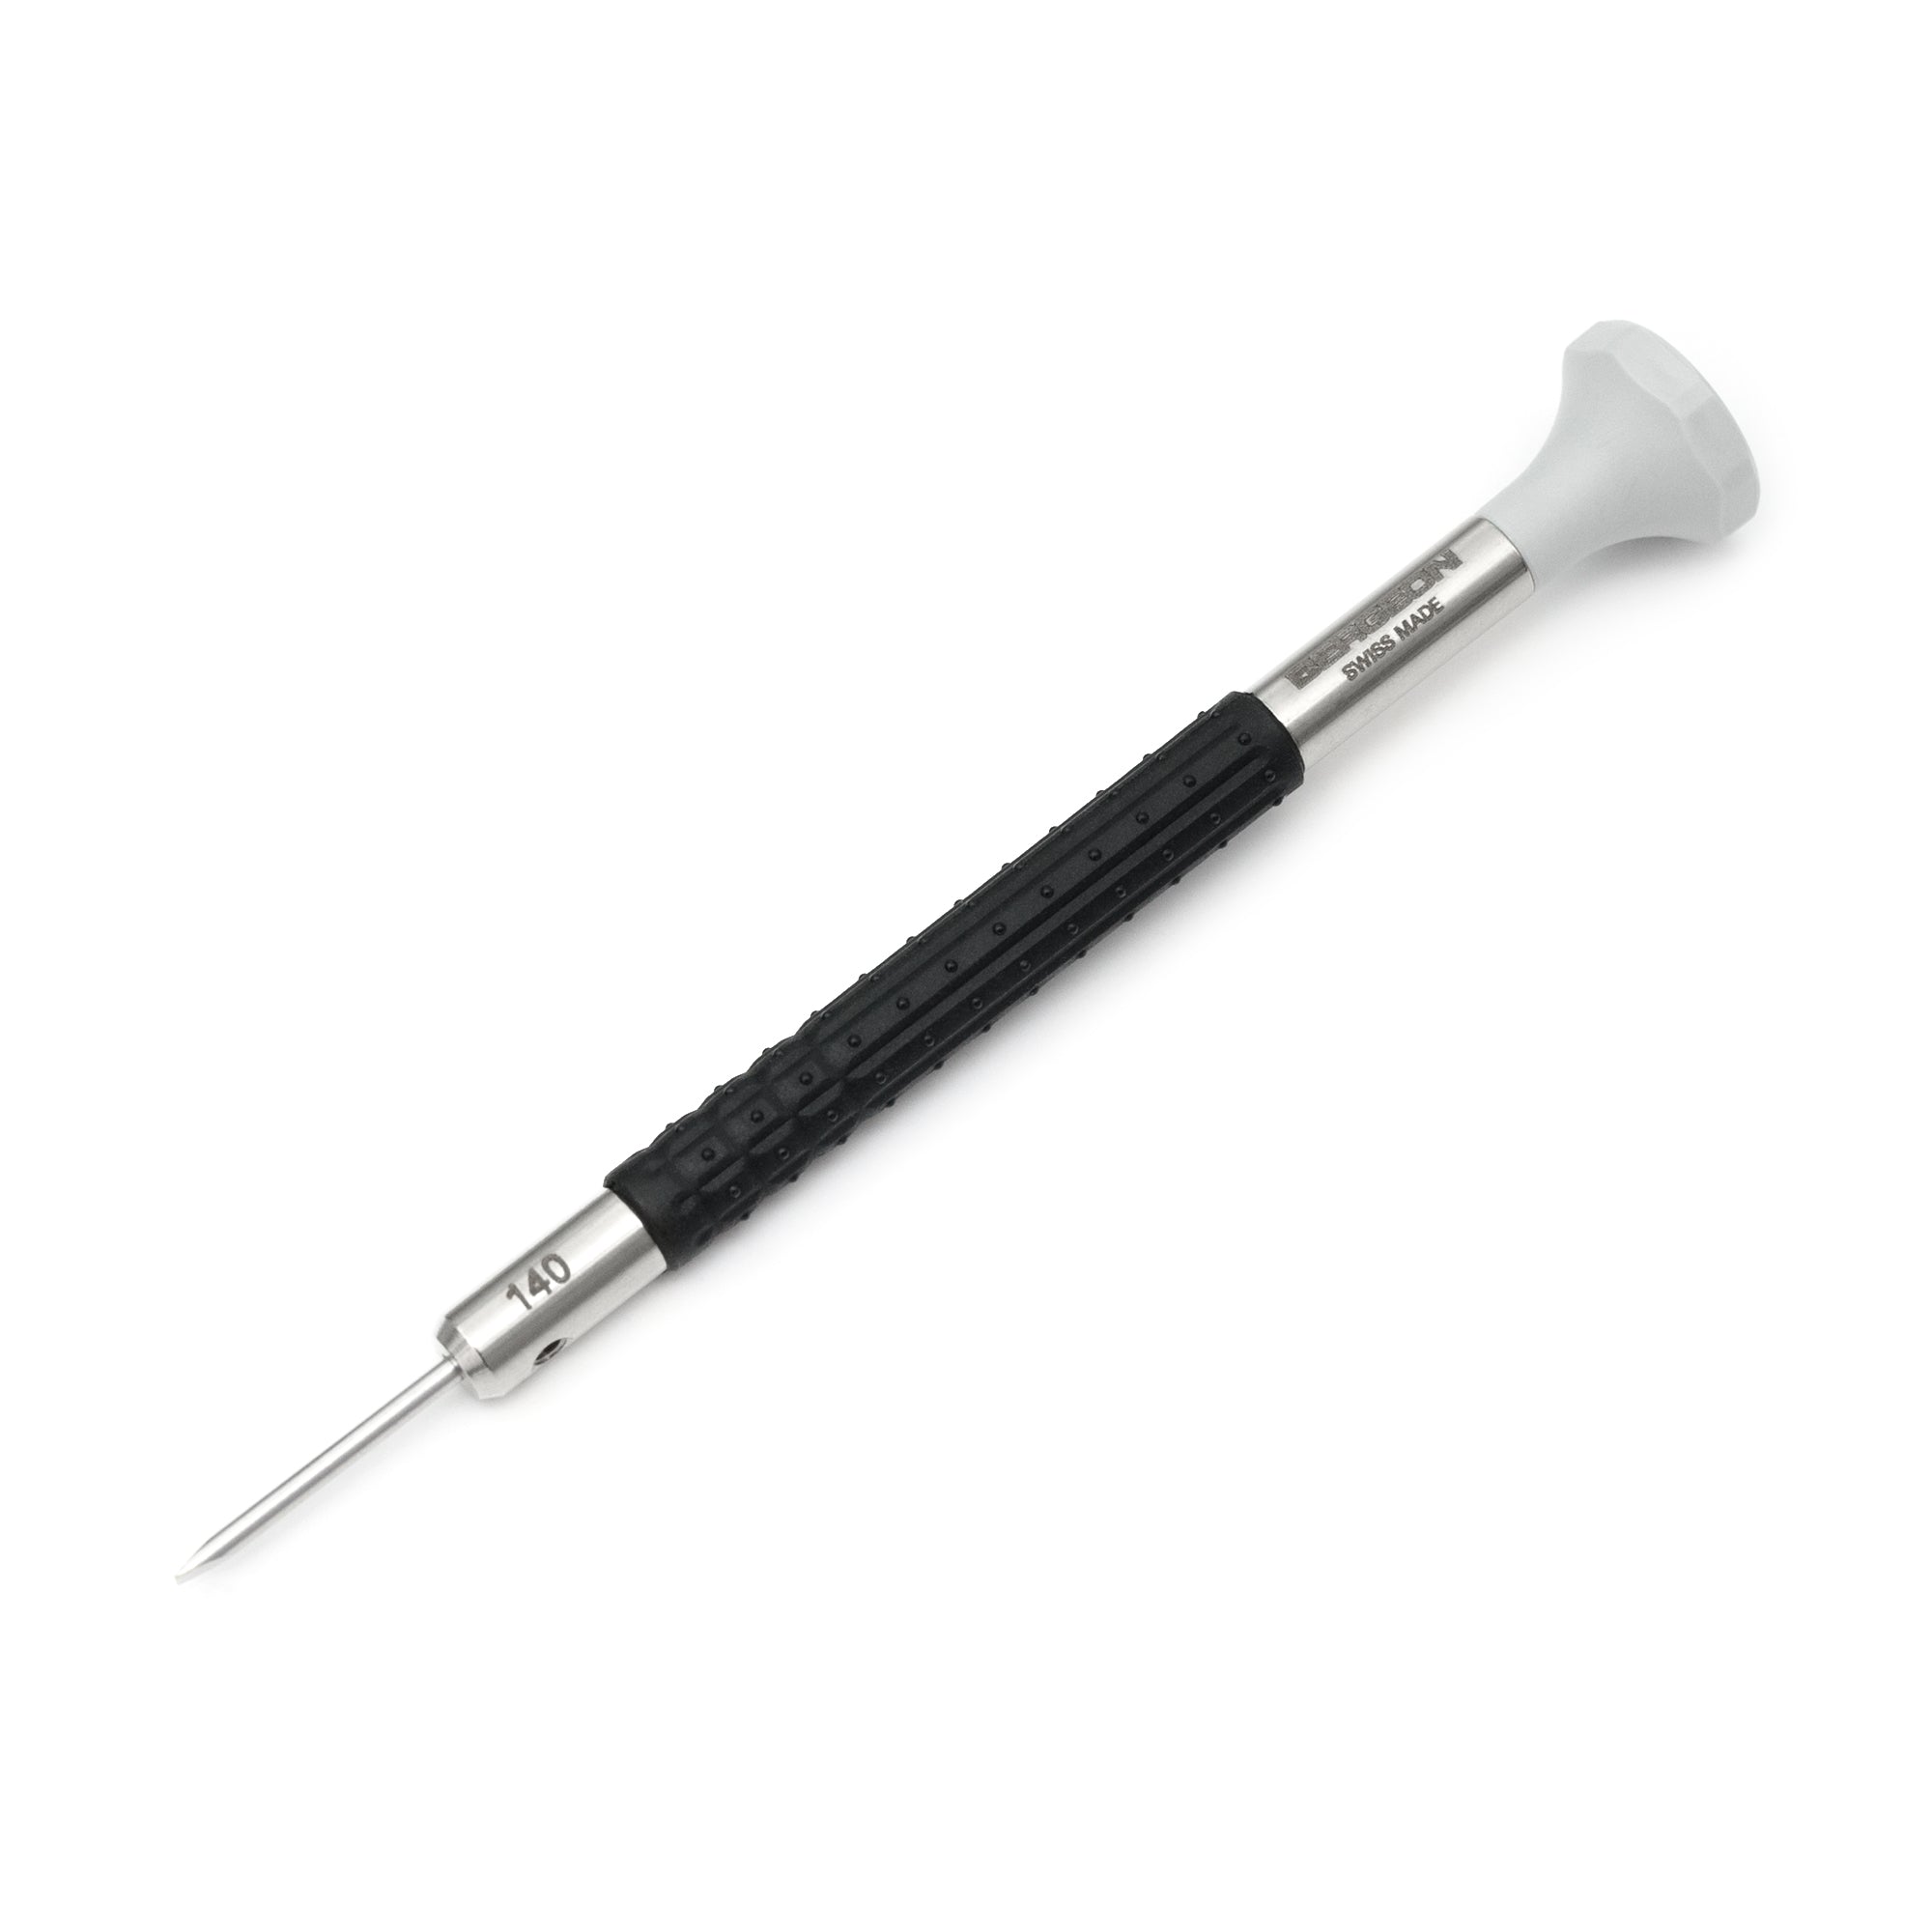 Swiss Bergeon 6899 Ergonomic Screwdriver with Slotted Blade 1.4 or